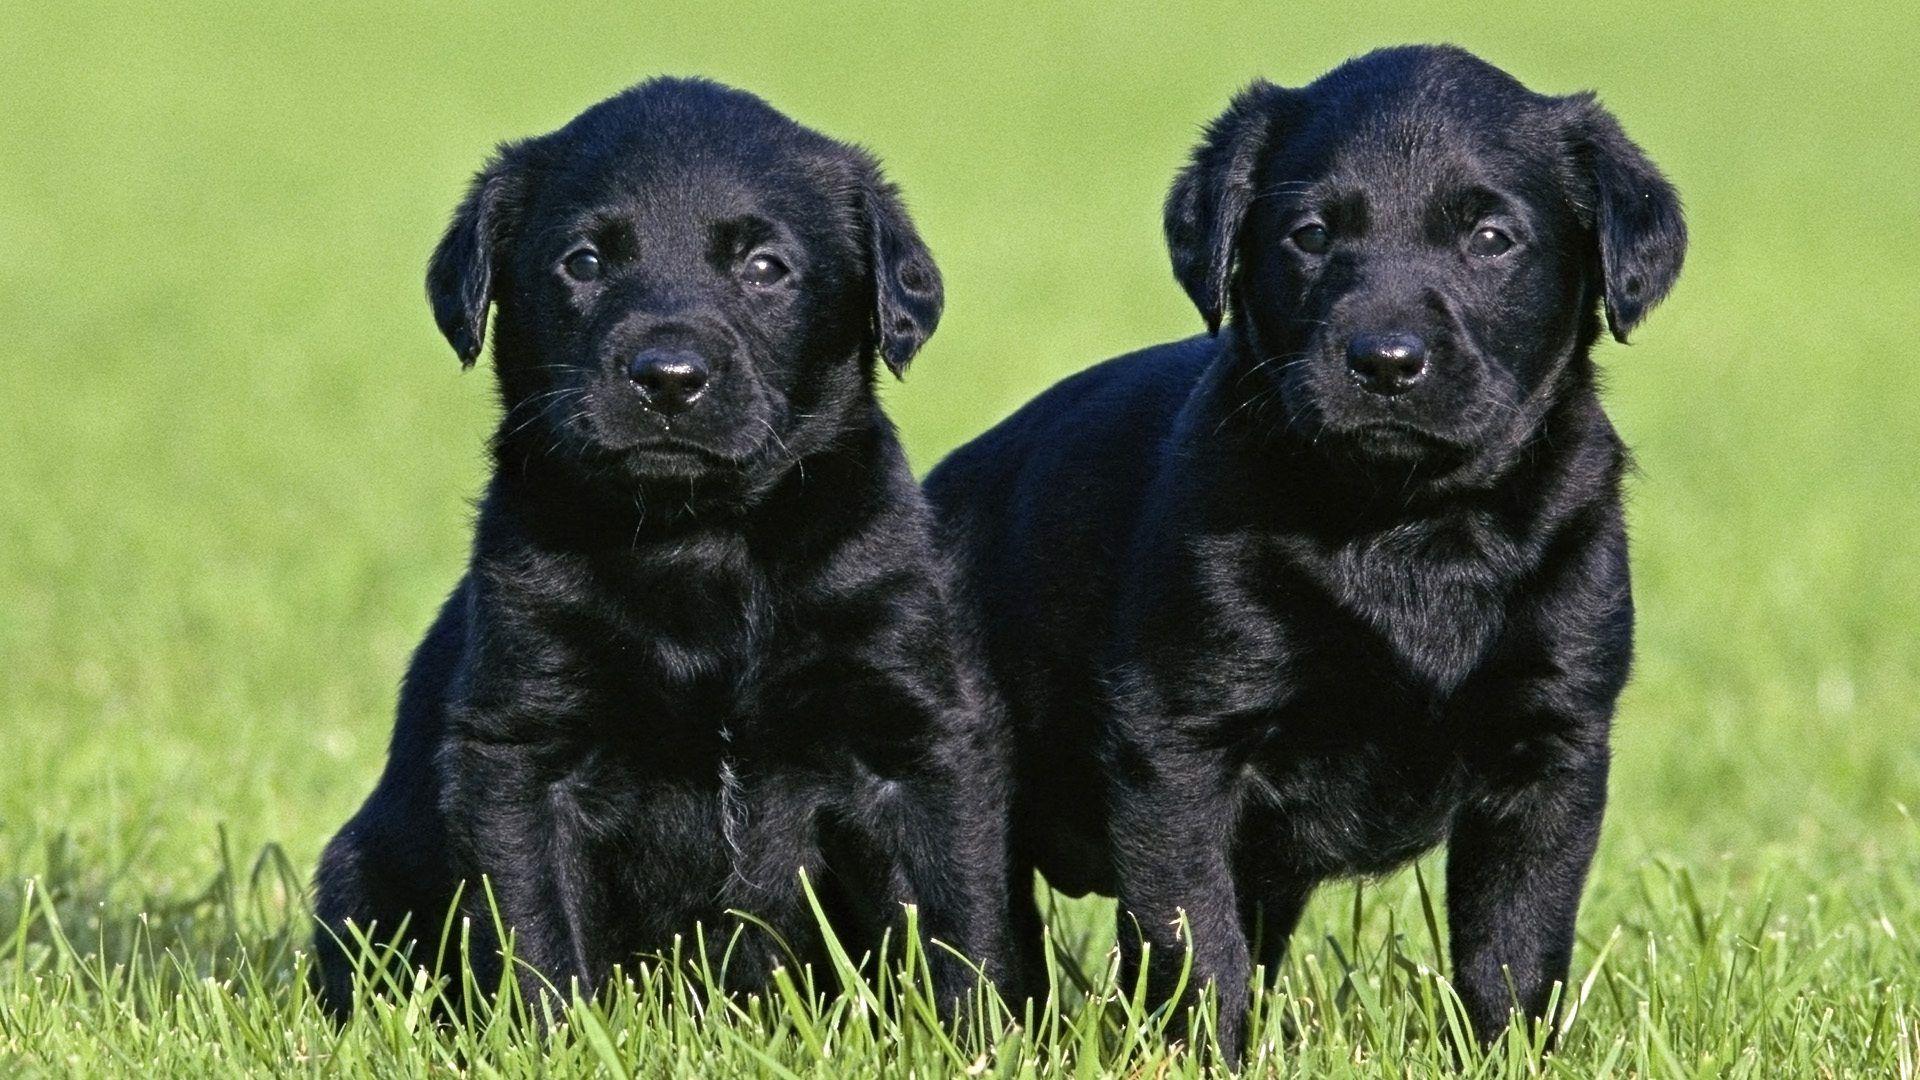 Cute Black Lab PuppiesWallpapers